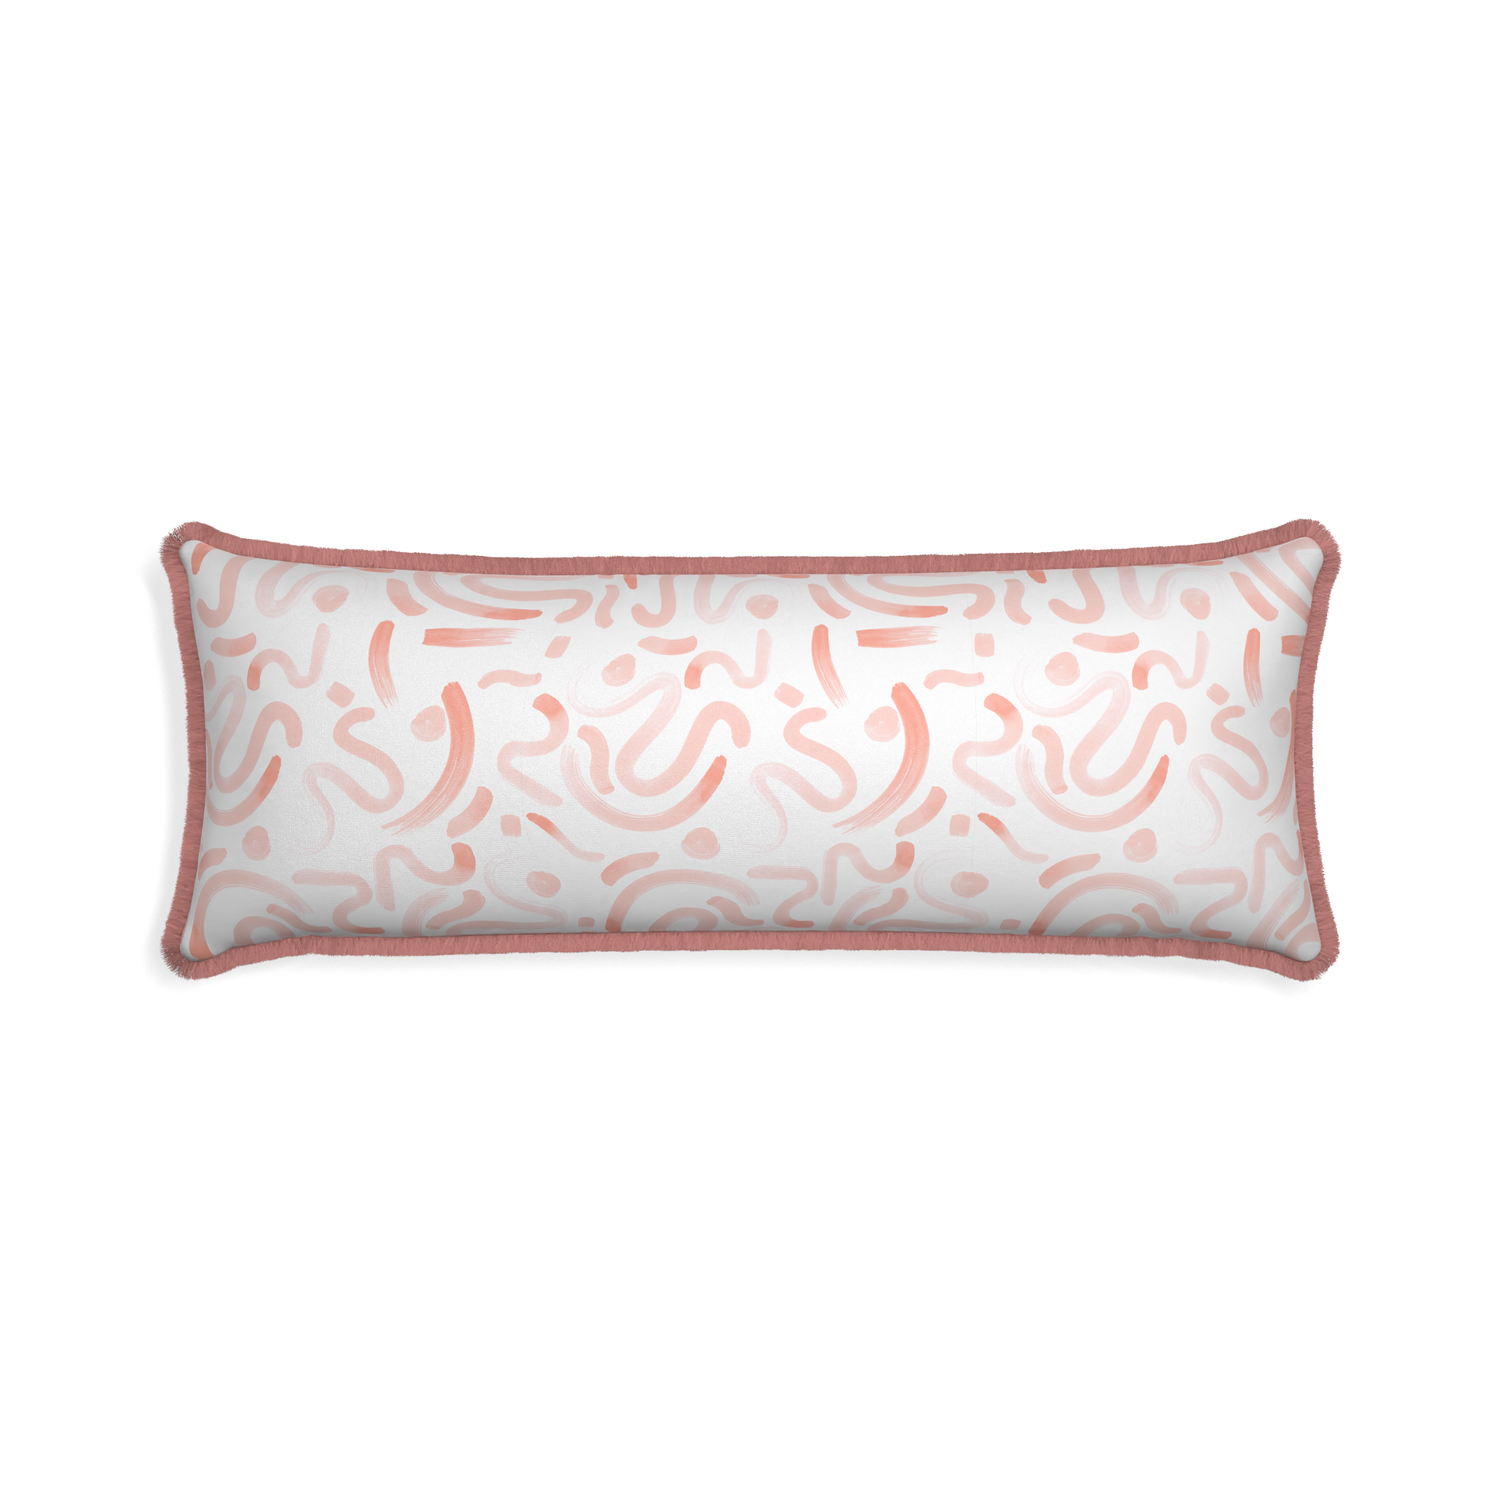 Xl-lumbar hockney pink custom pink graphicpillow with d fringe on white background